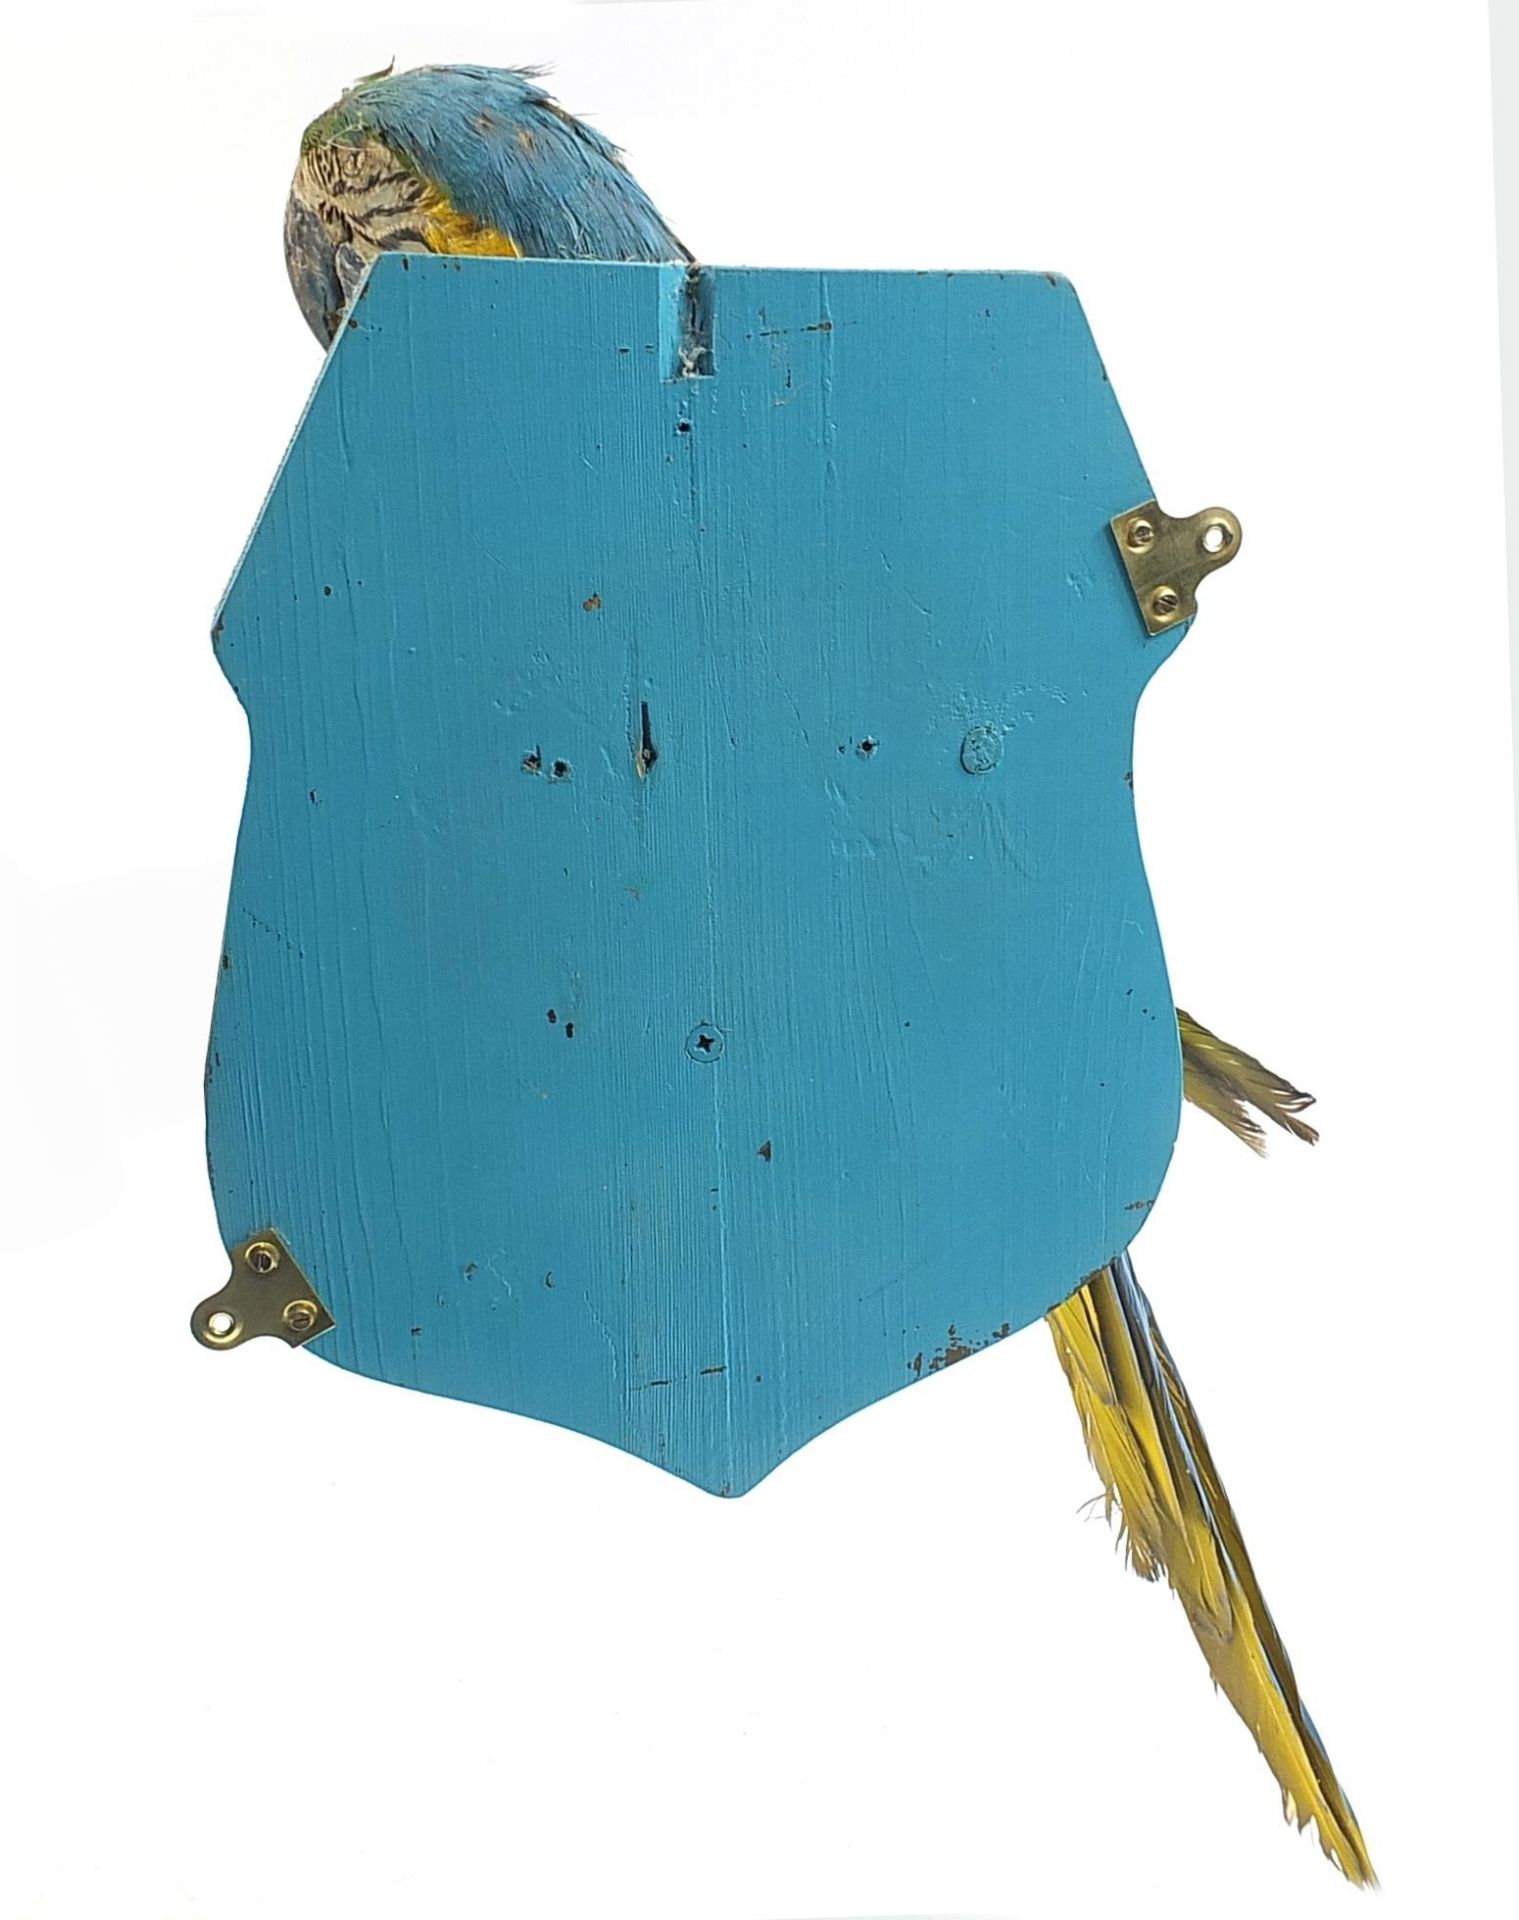 Taxidermy blue and gold macaw parrot mounted on a shield shaped wall plaque, 80cm high - Image 2 of 2